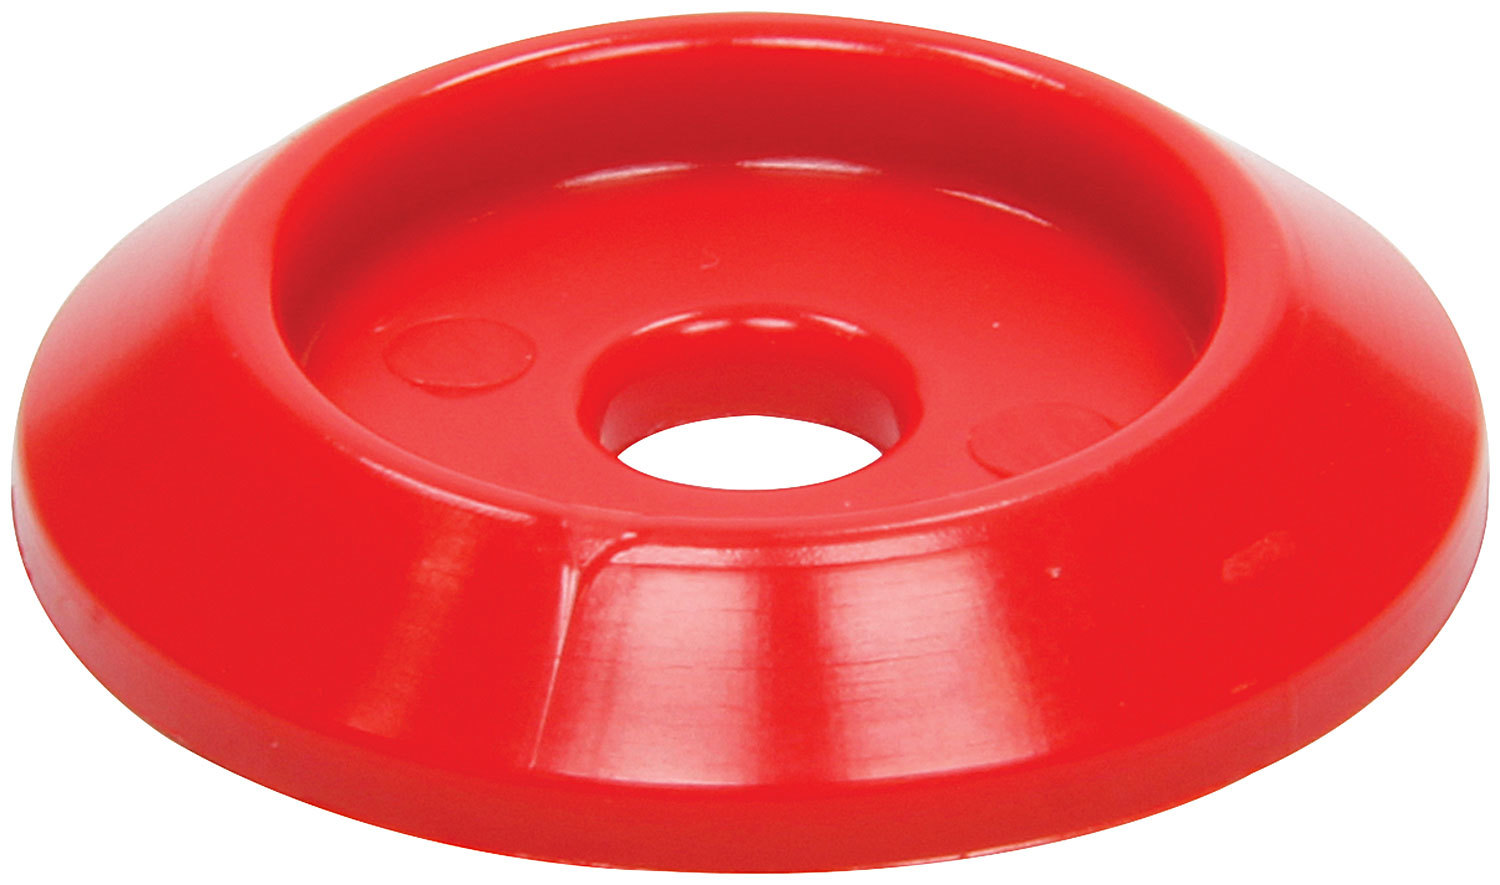 Body Bolt Washer Plastic Red 50pk ALL18847-50